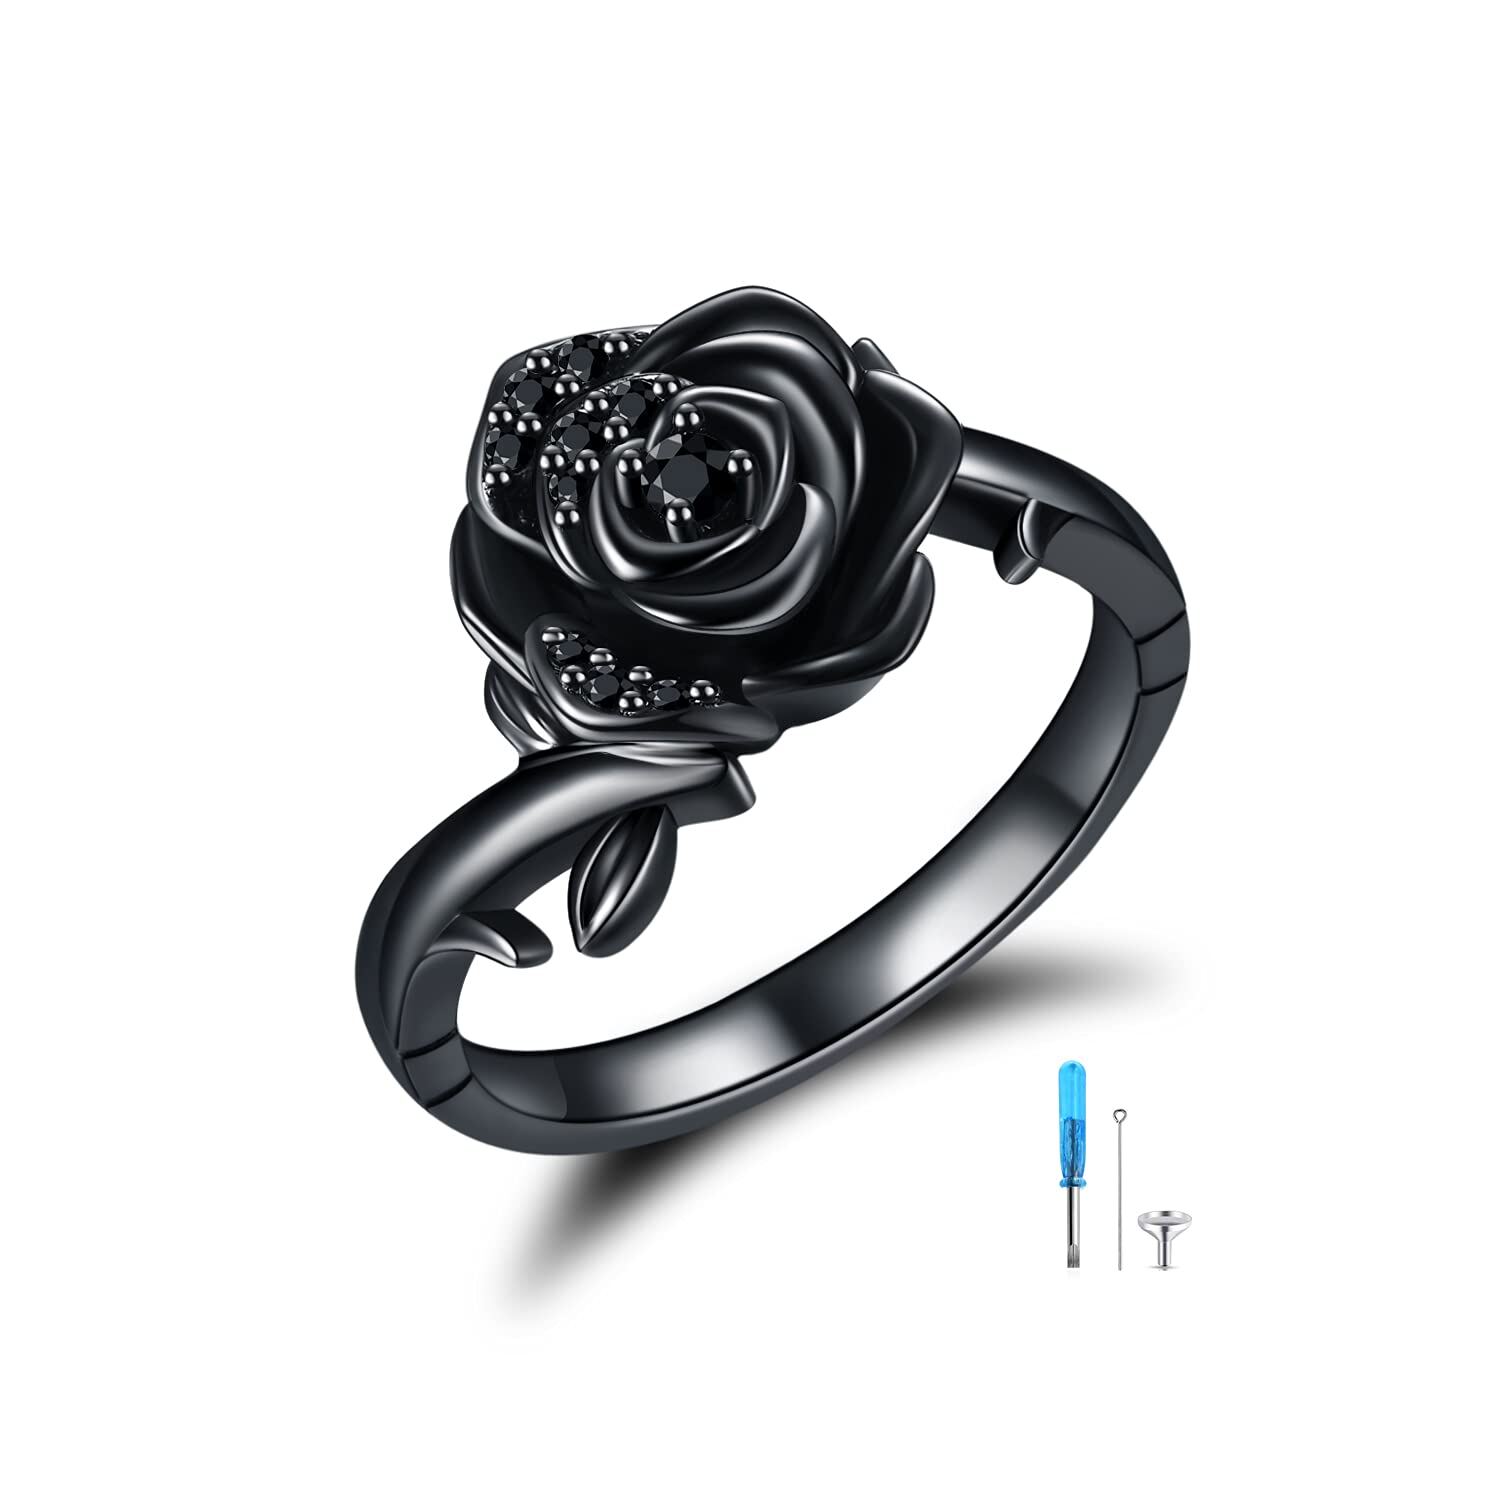 16274519459479dc61d - Rose Flower Cremation Urn Ring 925 Sterling Silver Black Rose Funeral Keepsake Ring Memorial Jewelry Bereavement Gifts for Women